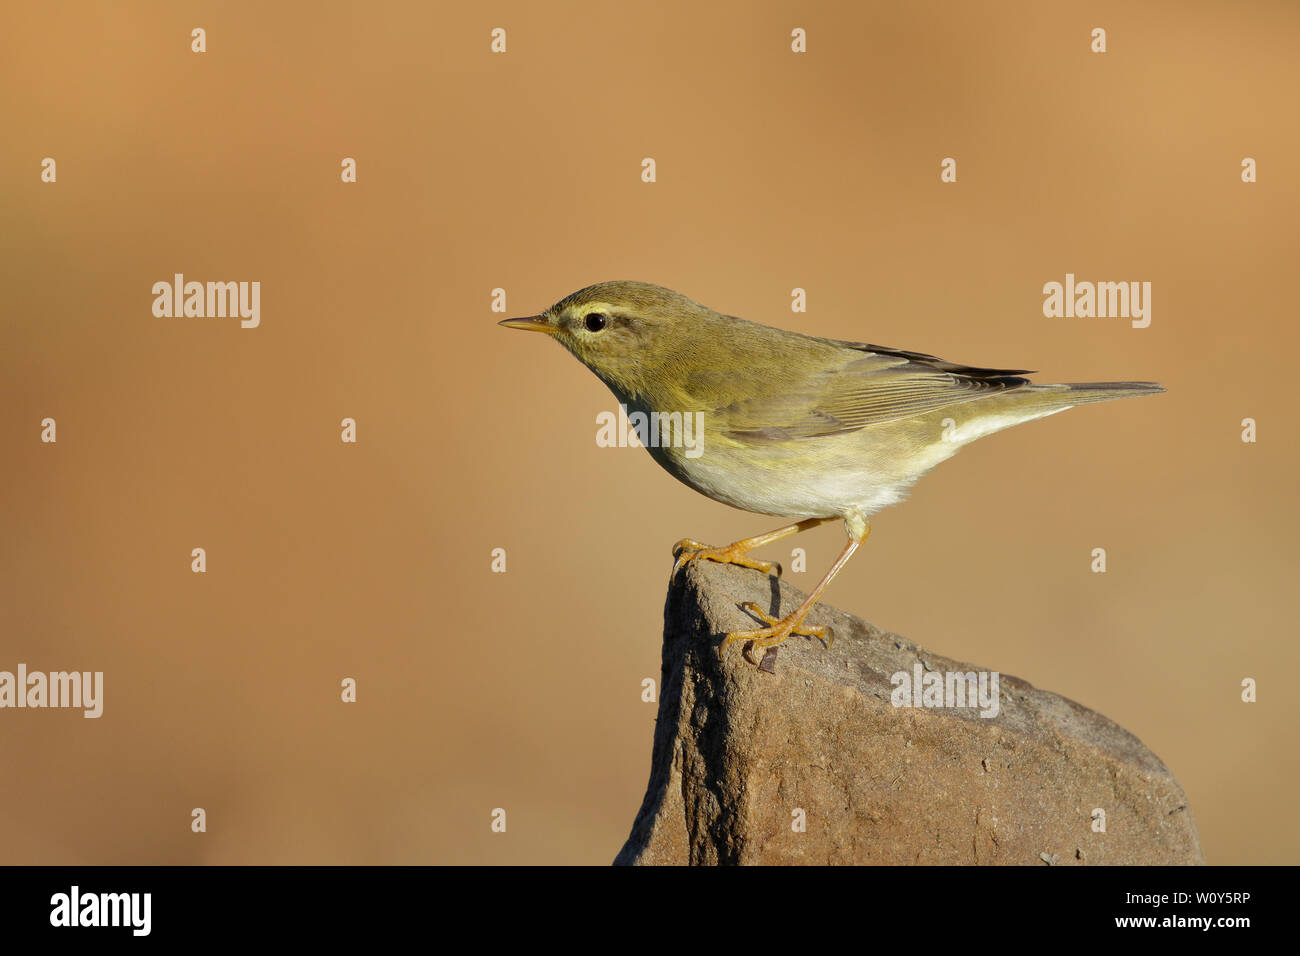 Phylloscopus trochilus, Willow Warbler perched on a branch. Migratory insectivorous bird. Spain. Europe. Stock Photo